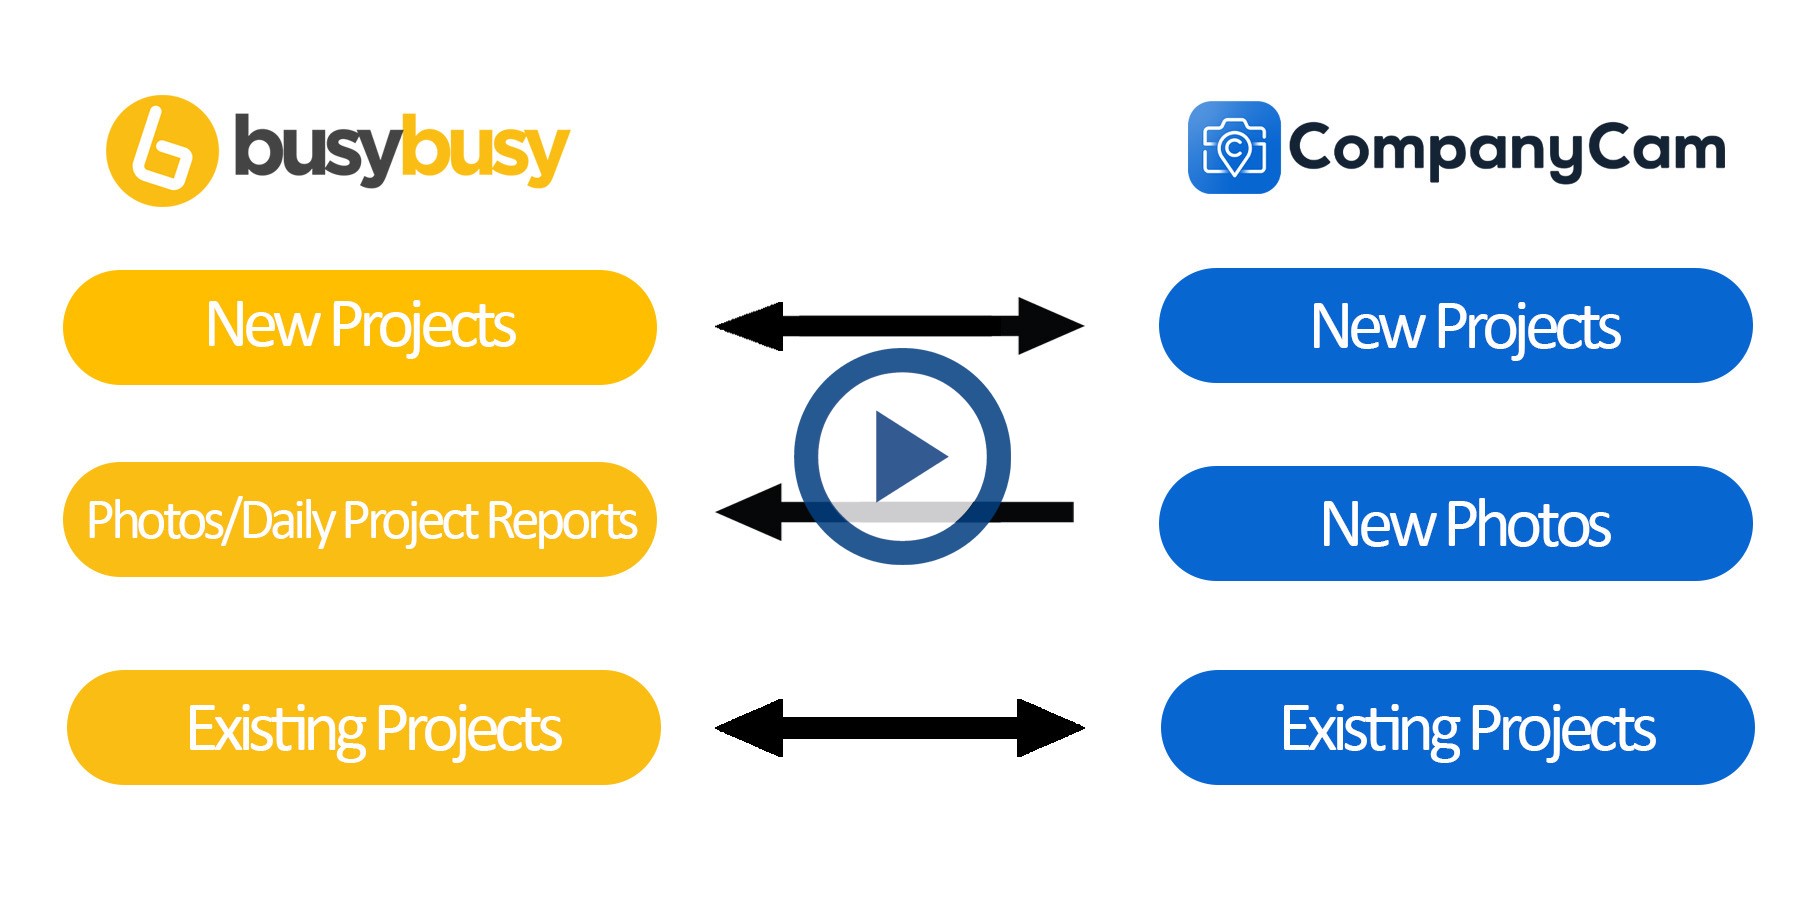 CompanyCam and busybusy integration